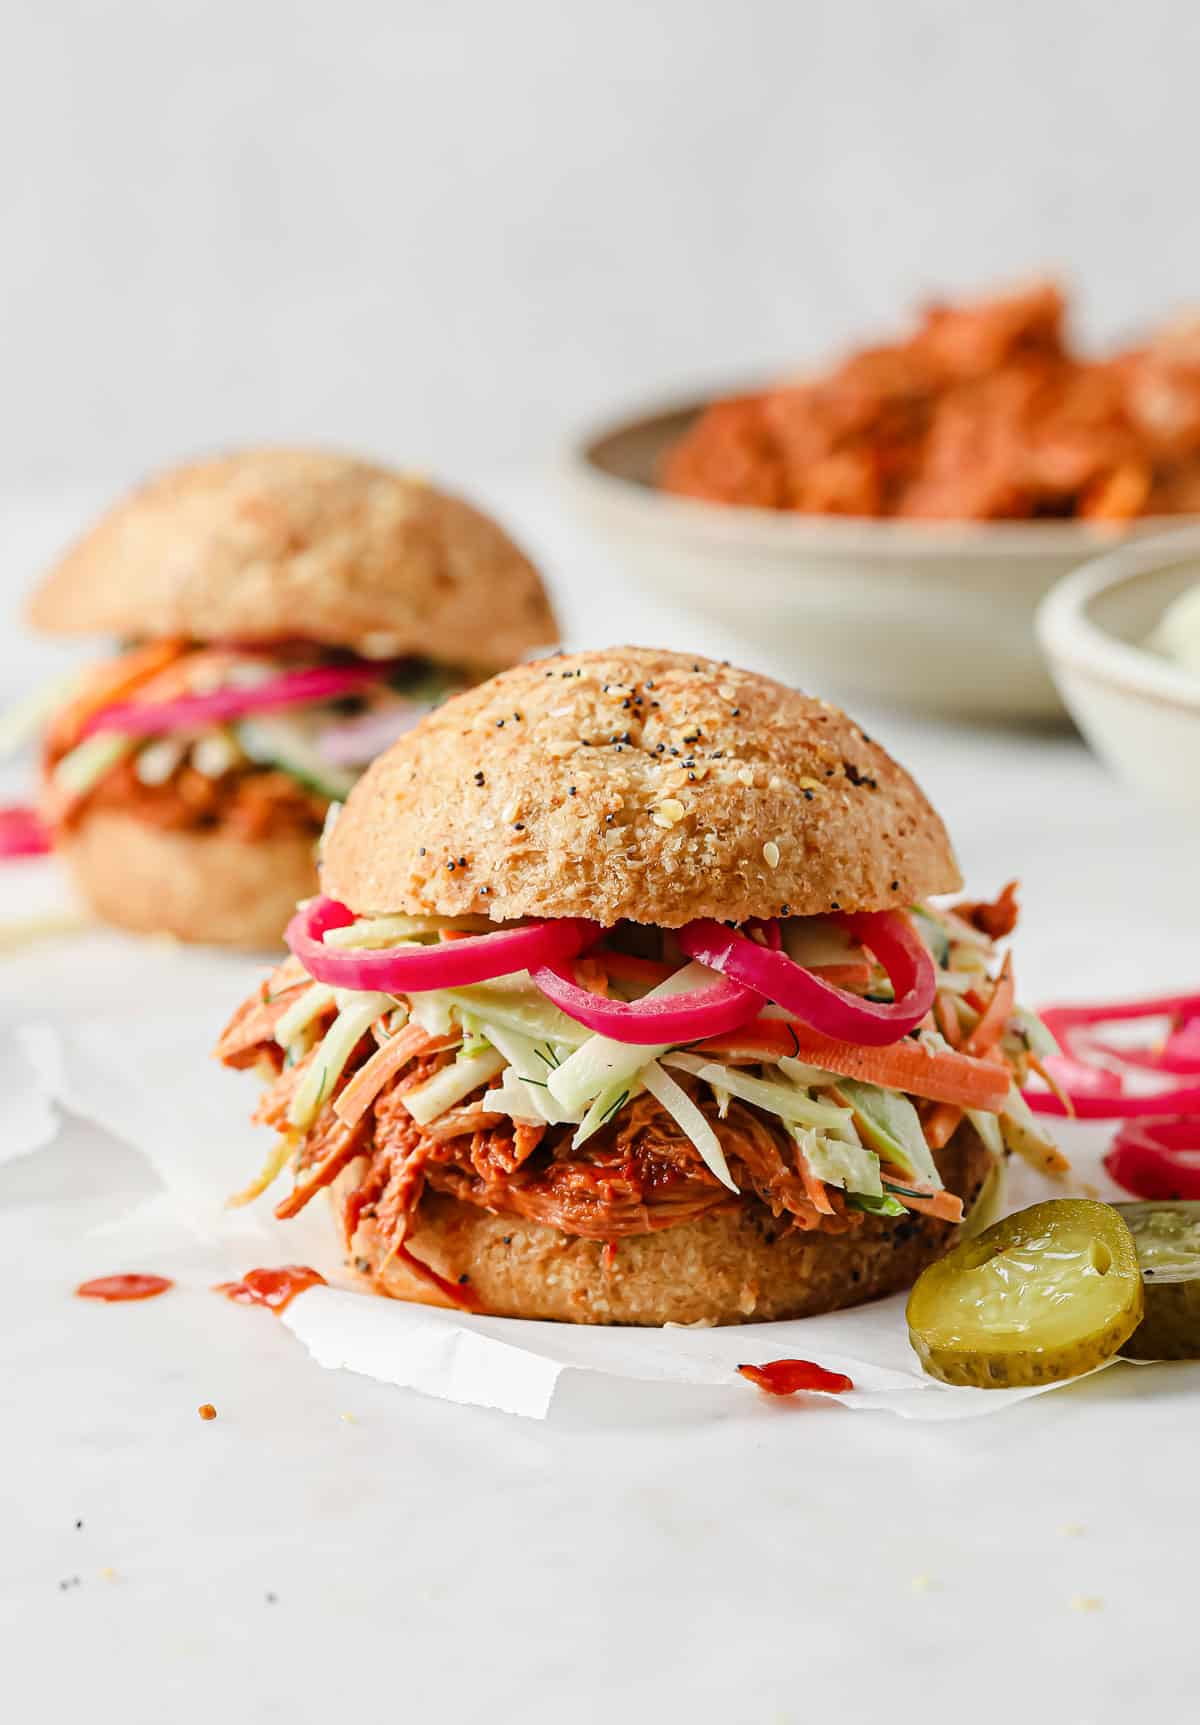 barbecue pulled pork sandwich with keto buns, barbecue pork, broccoli slaw, and pickled red onions